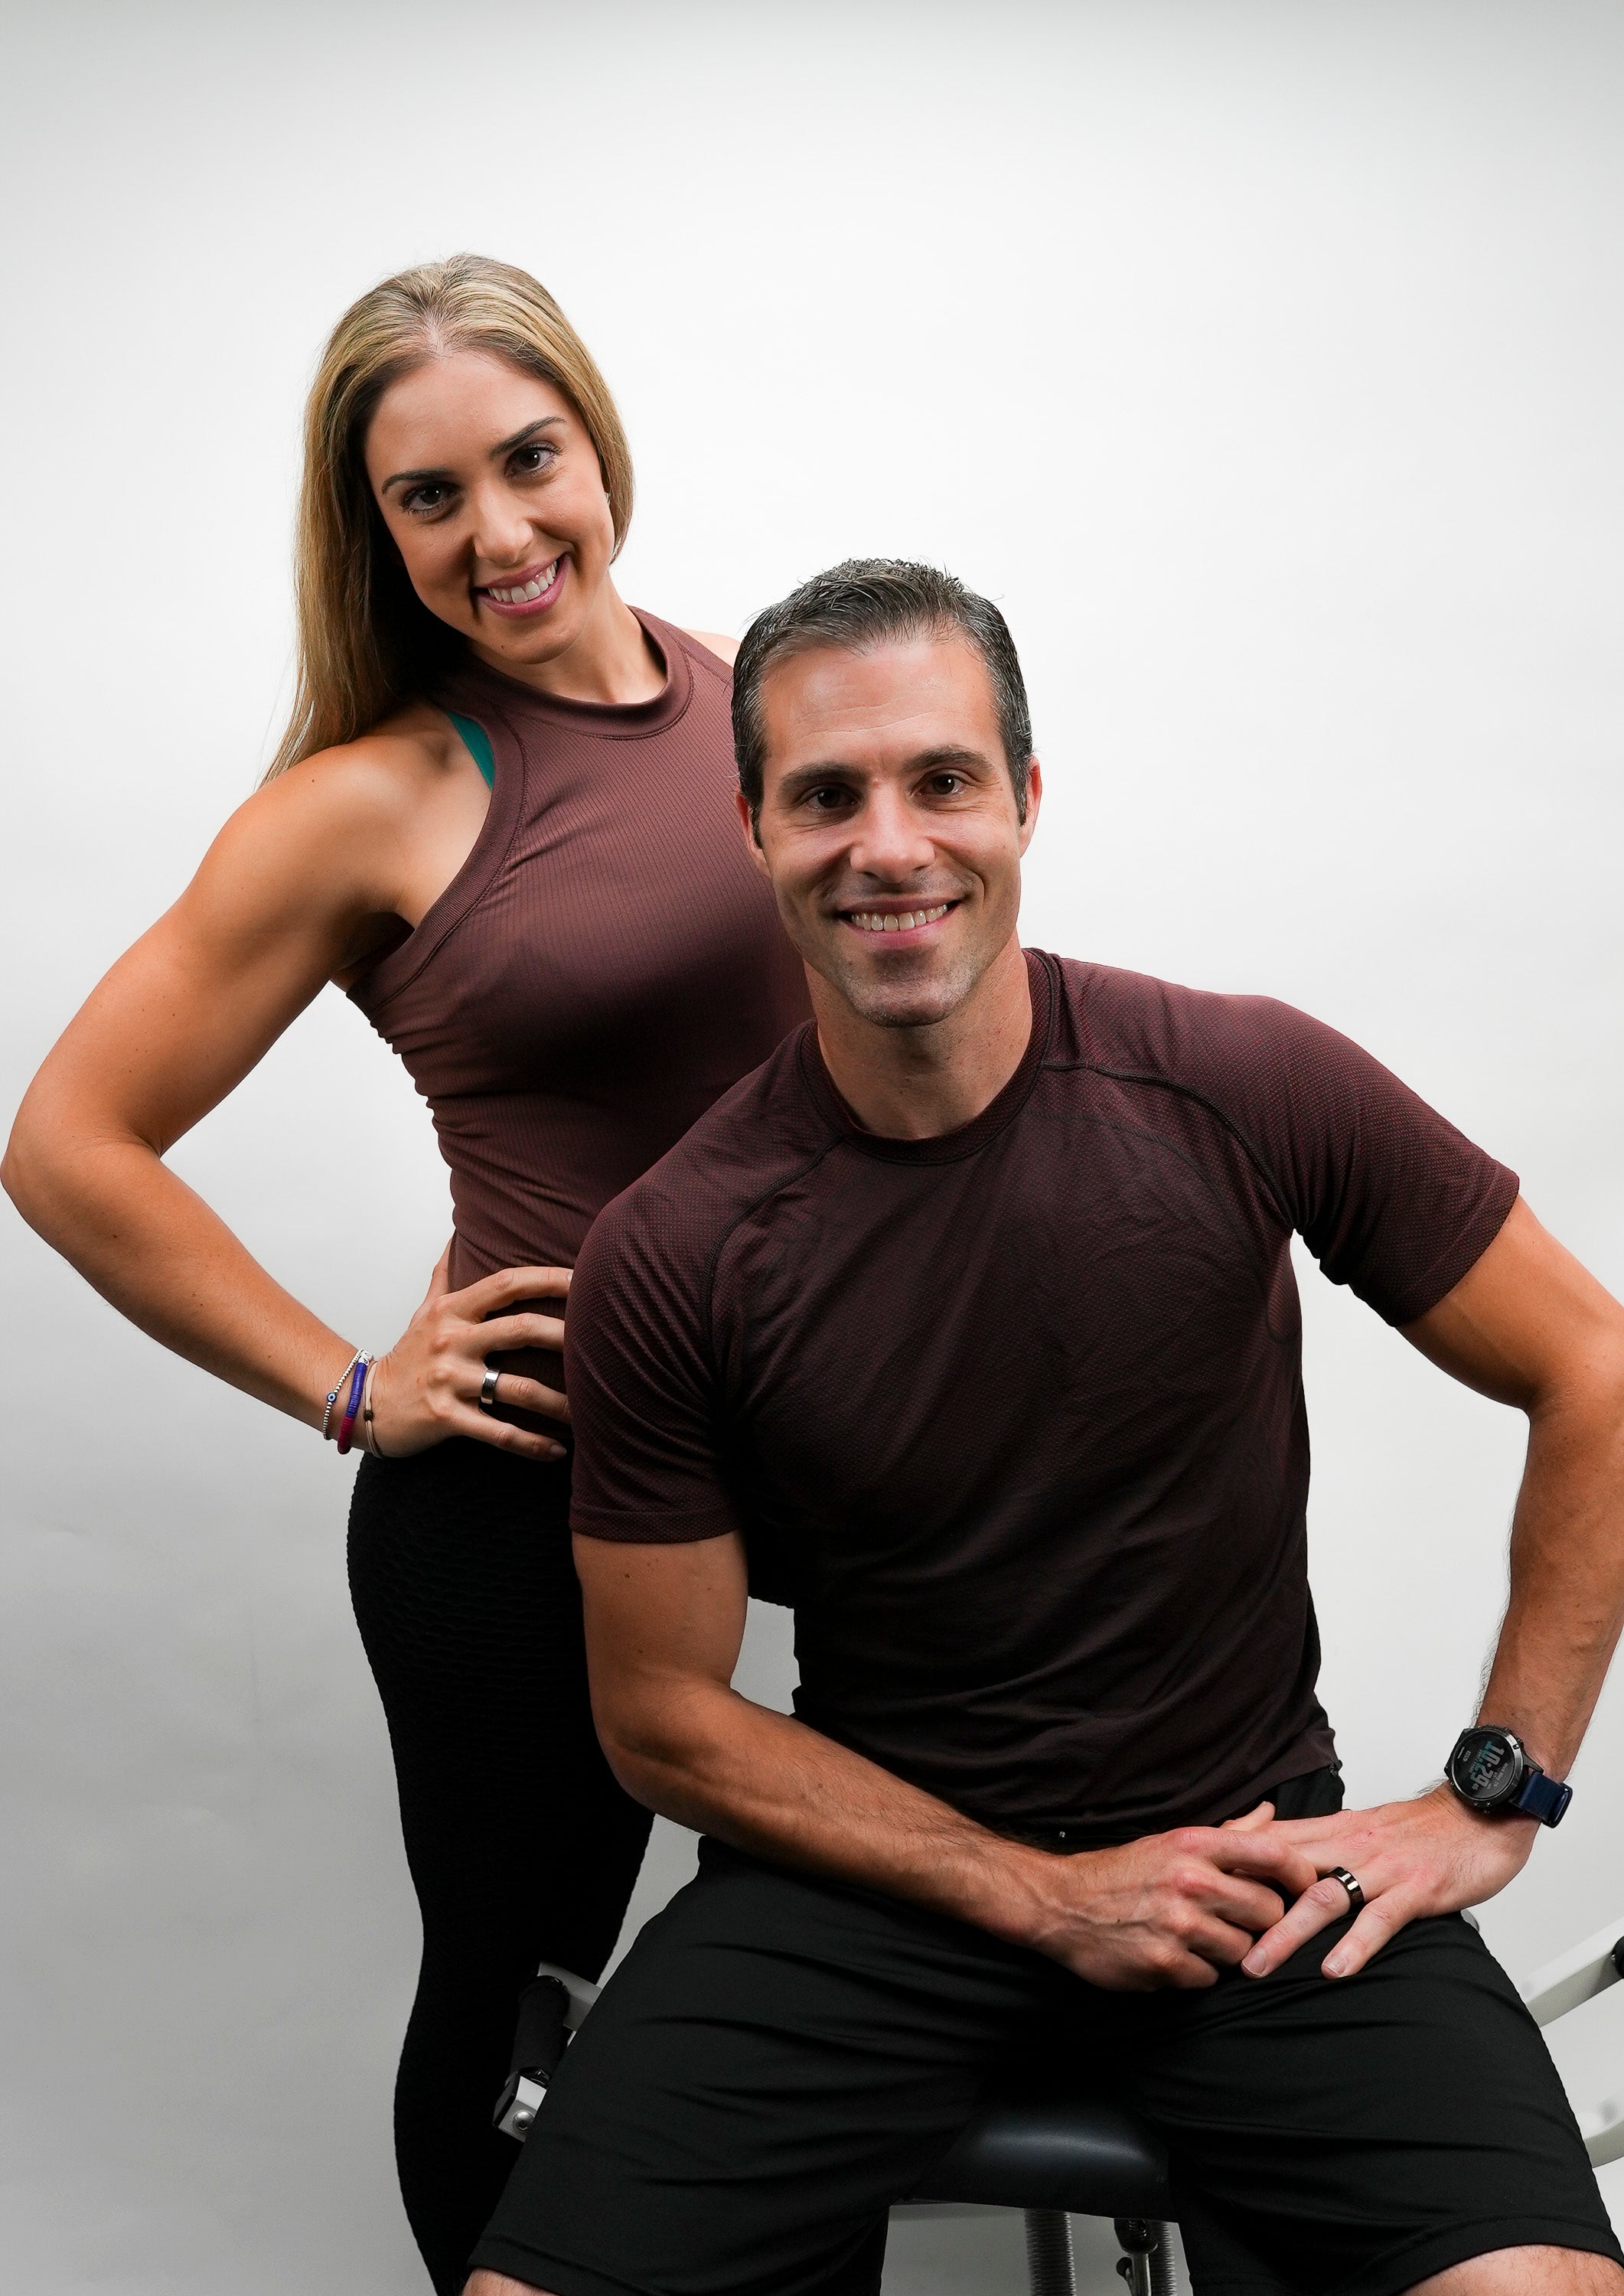 Load video: Lindsey and Anthony talk about what StackTrax Fitness is and how they want to make fitness happen one trax at a time